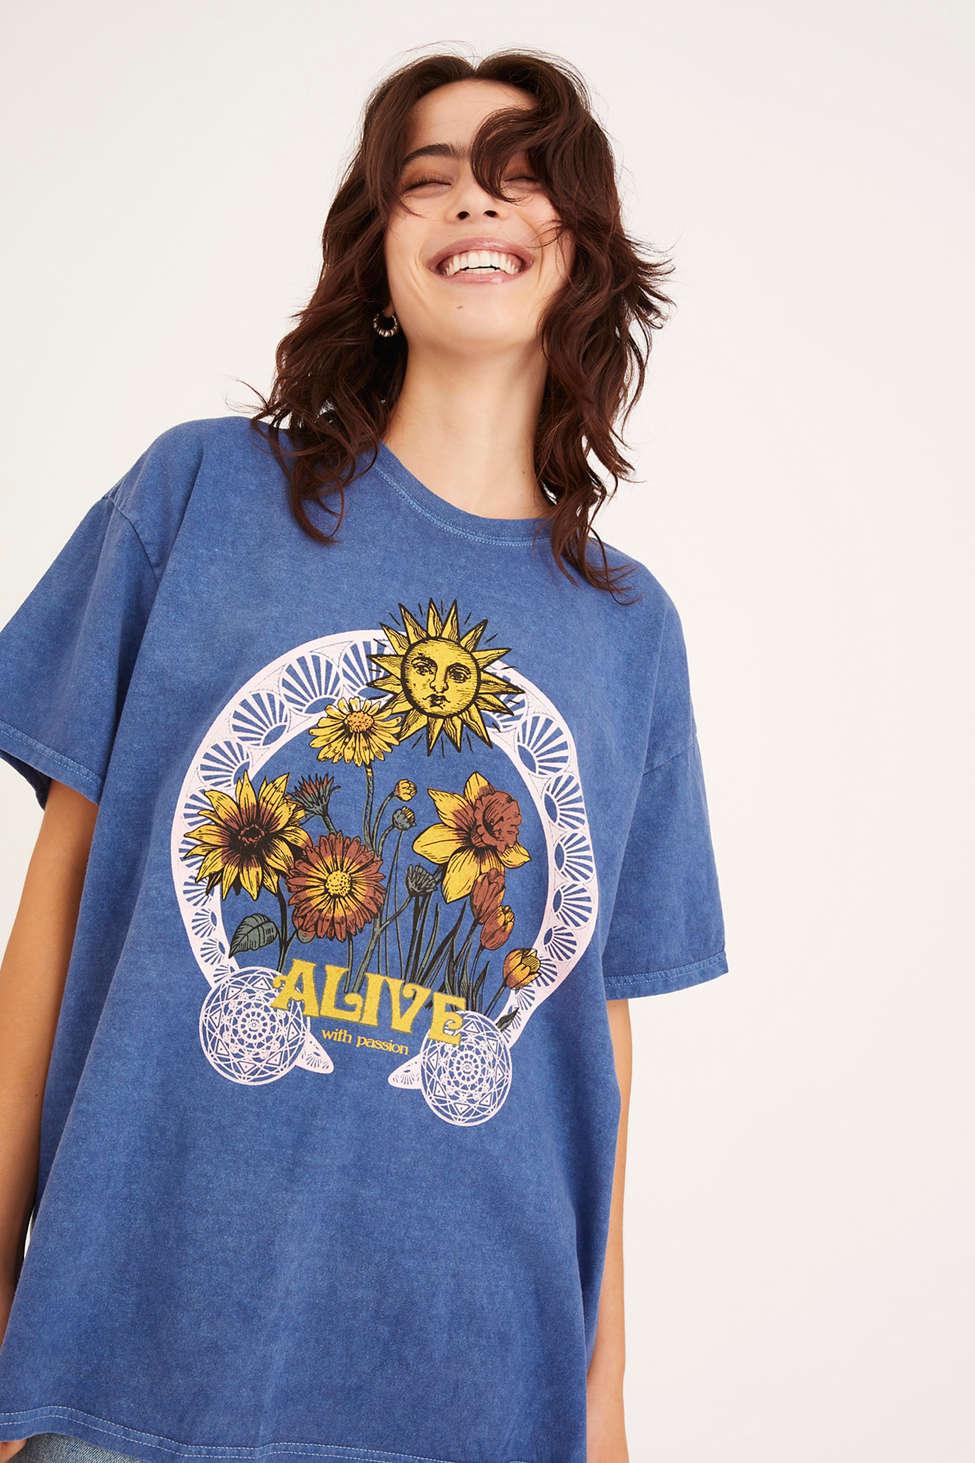 anklageren Kæledyr At placere Urban Outfitters Alive With Passion T-shirt Dress in Blue | Lyst